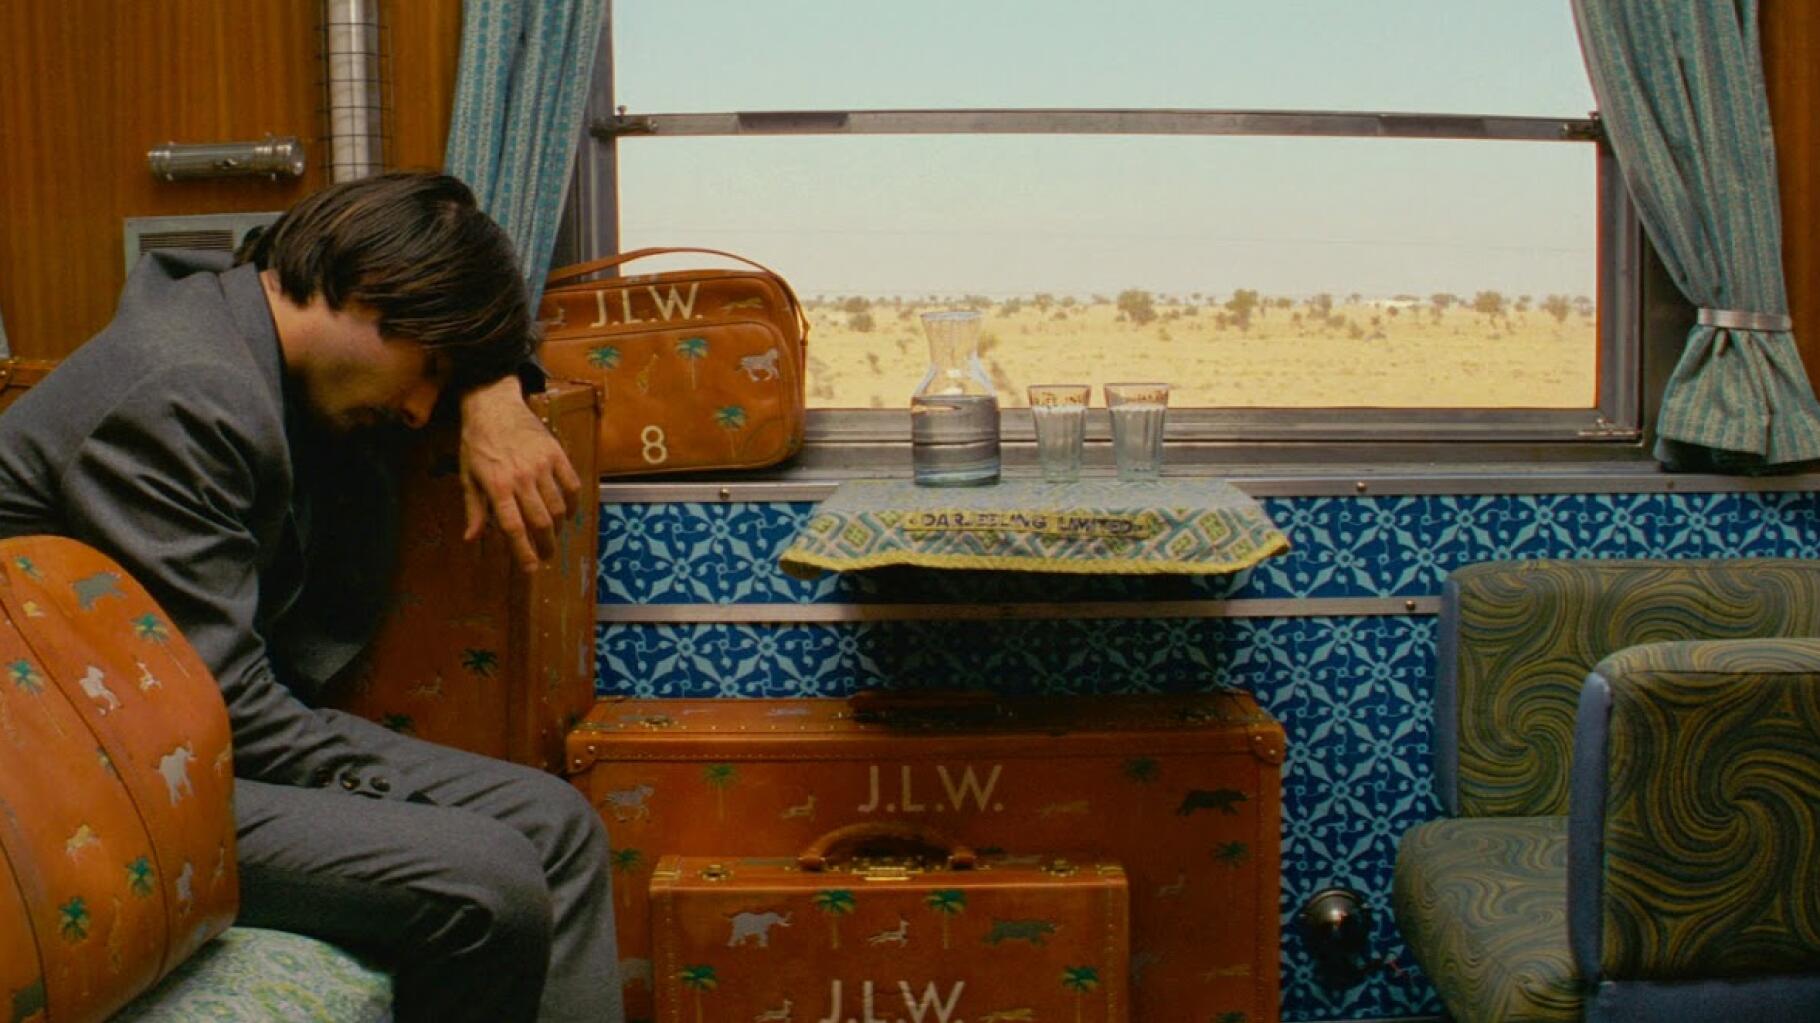 Travelling Wes Anderson Style: The Darjeeling Limited